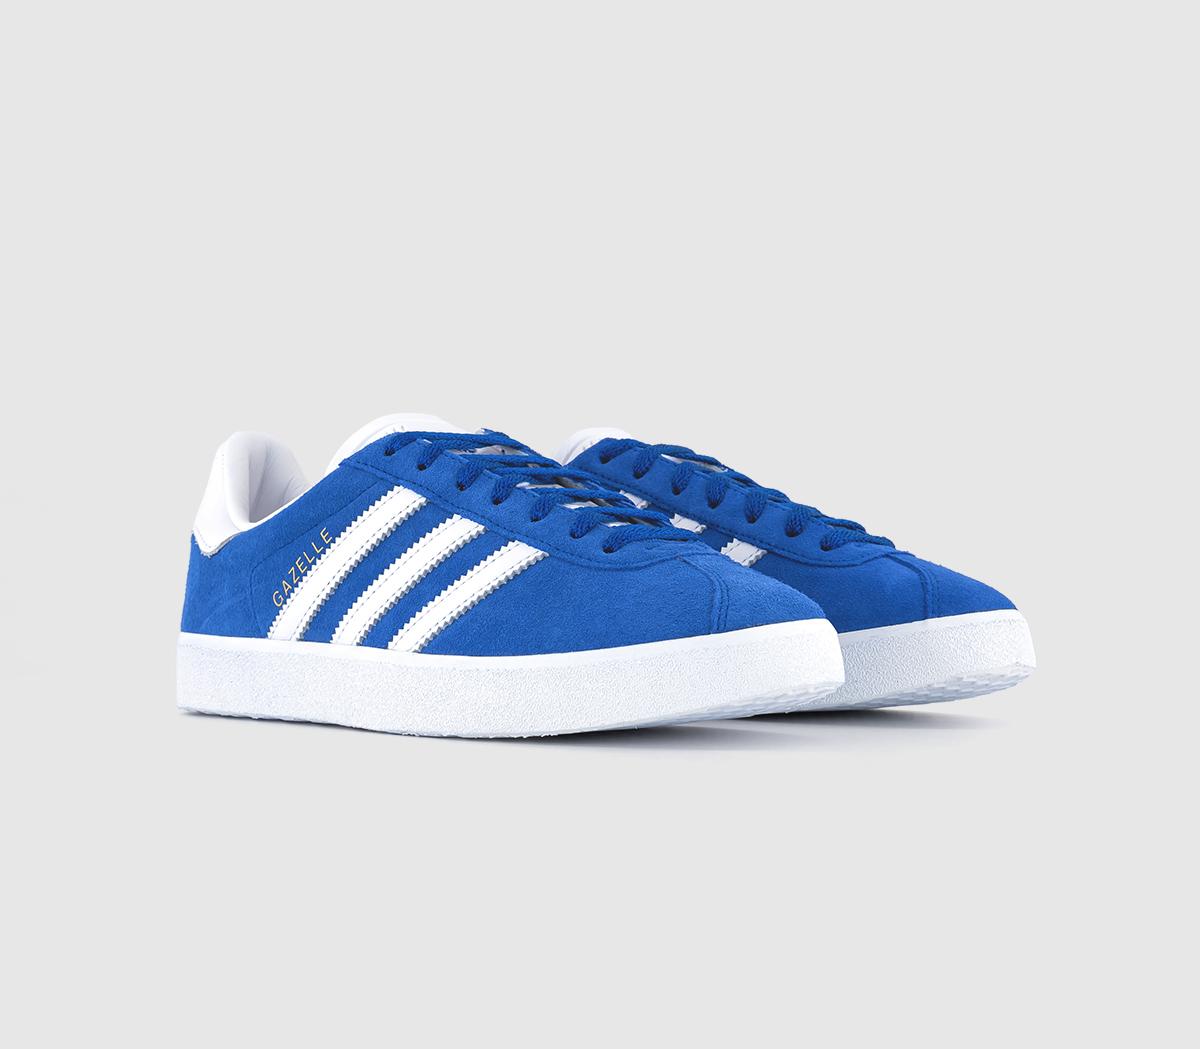 Adidas Womens Gazelle 85 Trainers Royal Blue White Gold Met, 8